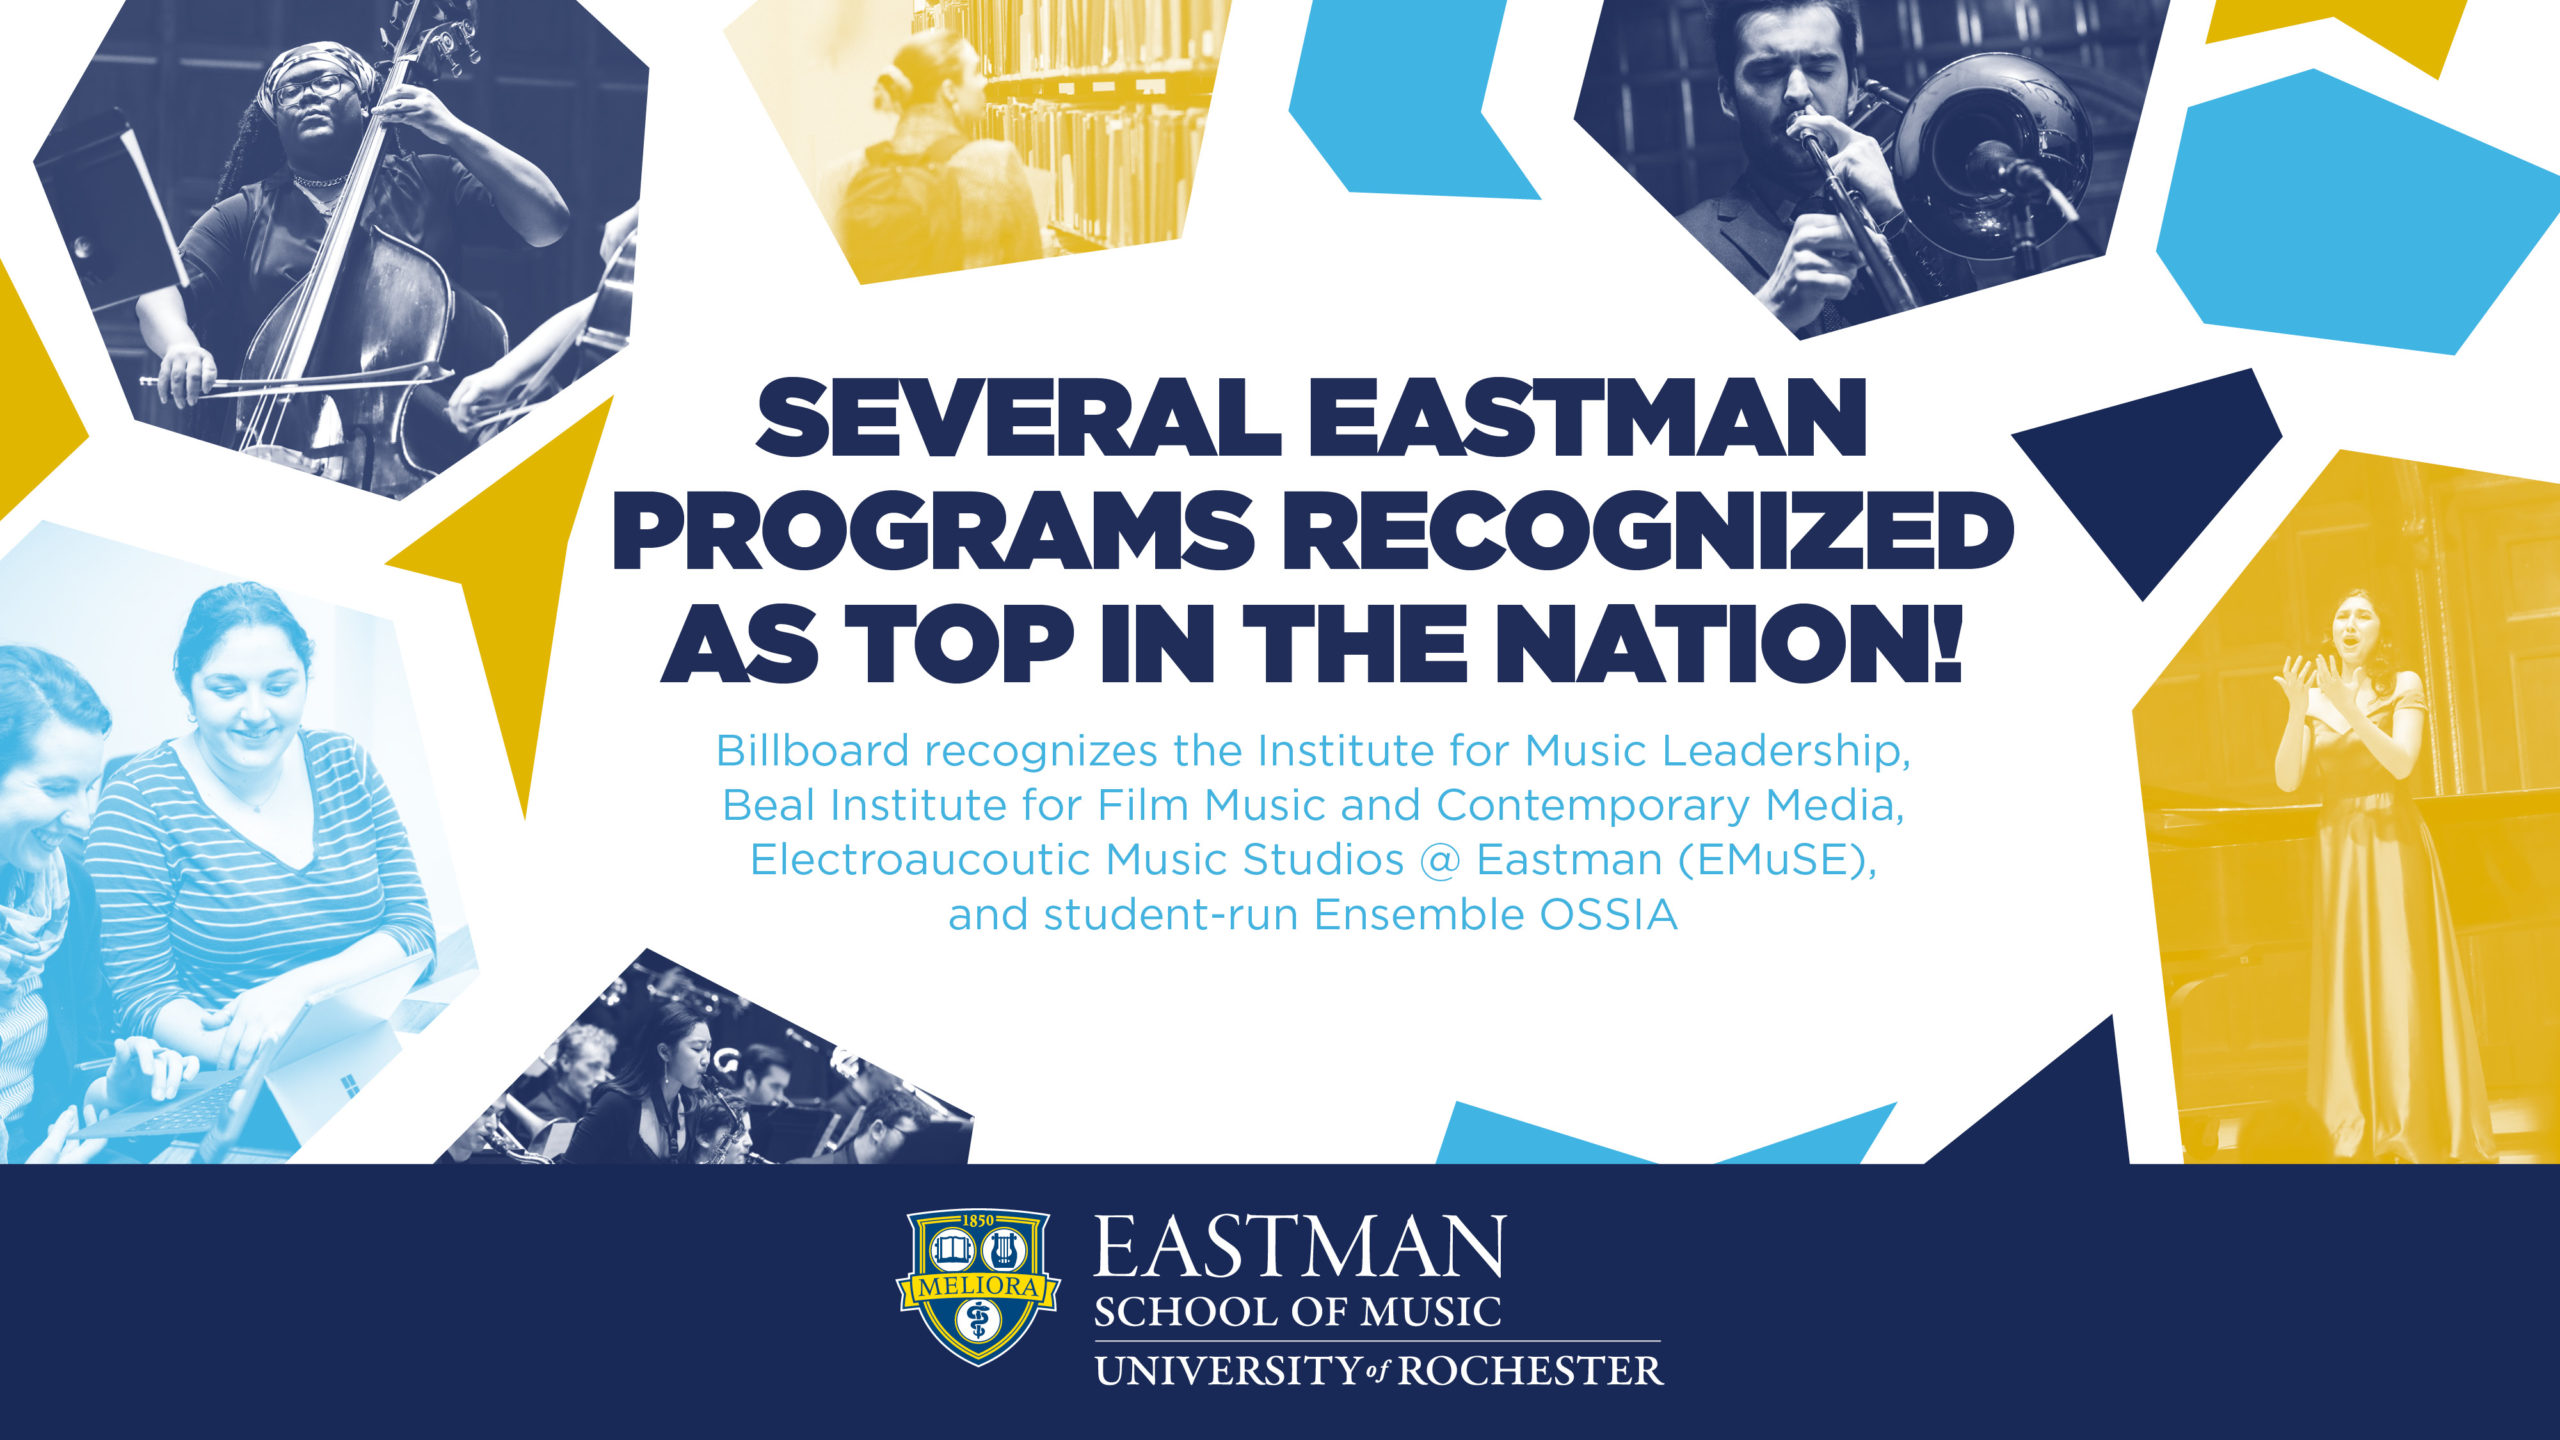 Several Eastman Programs recognized as top in the Nation!